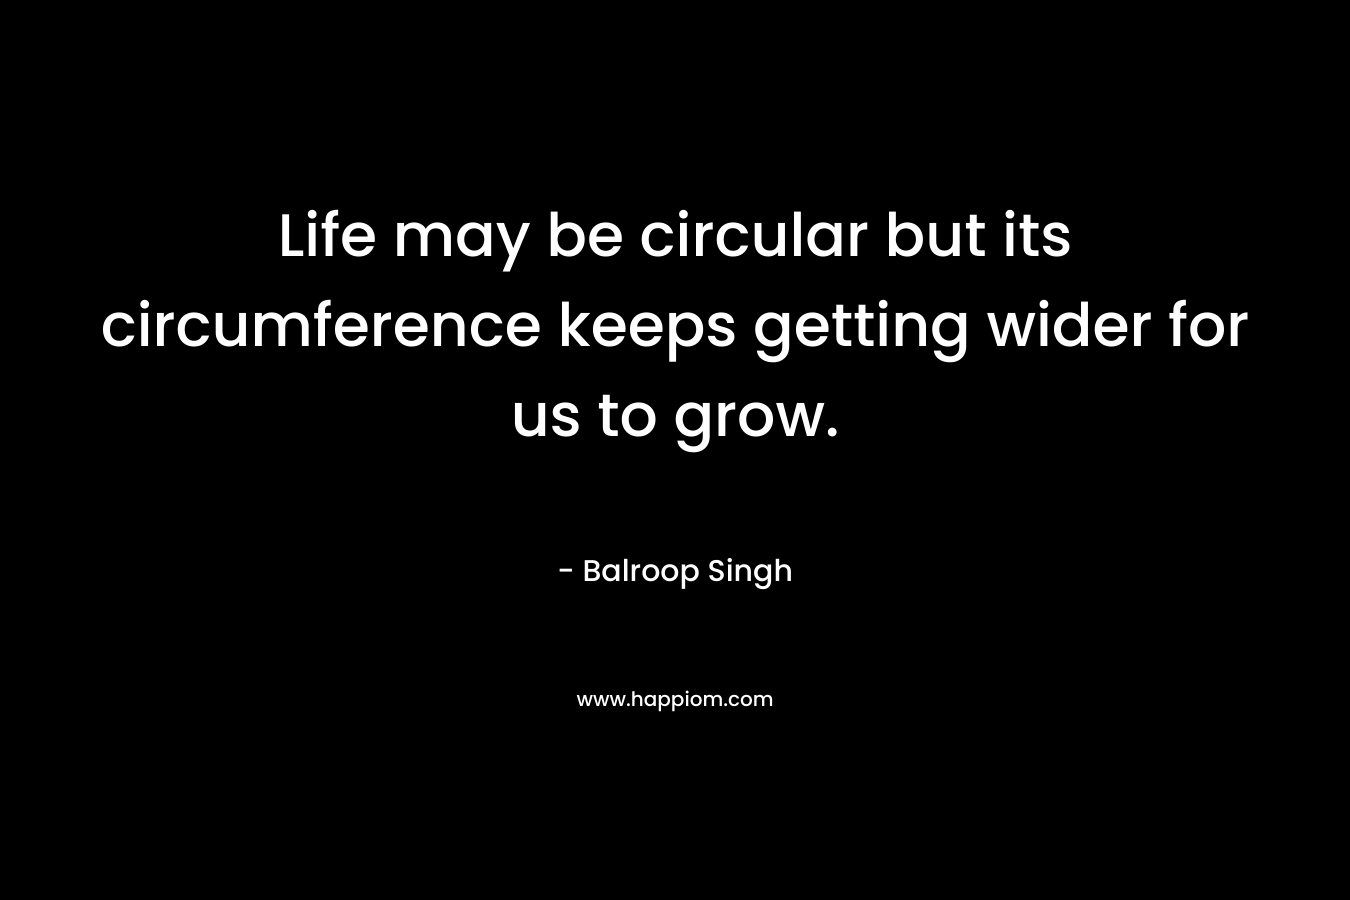 Life may be circular but its circumference keeps getting wider for us to grow.